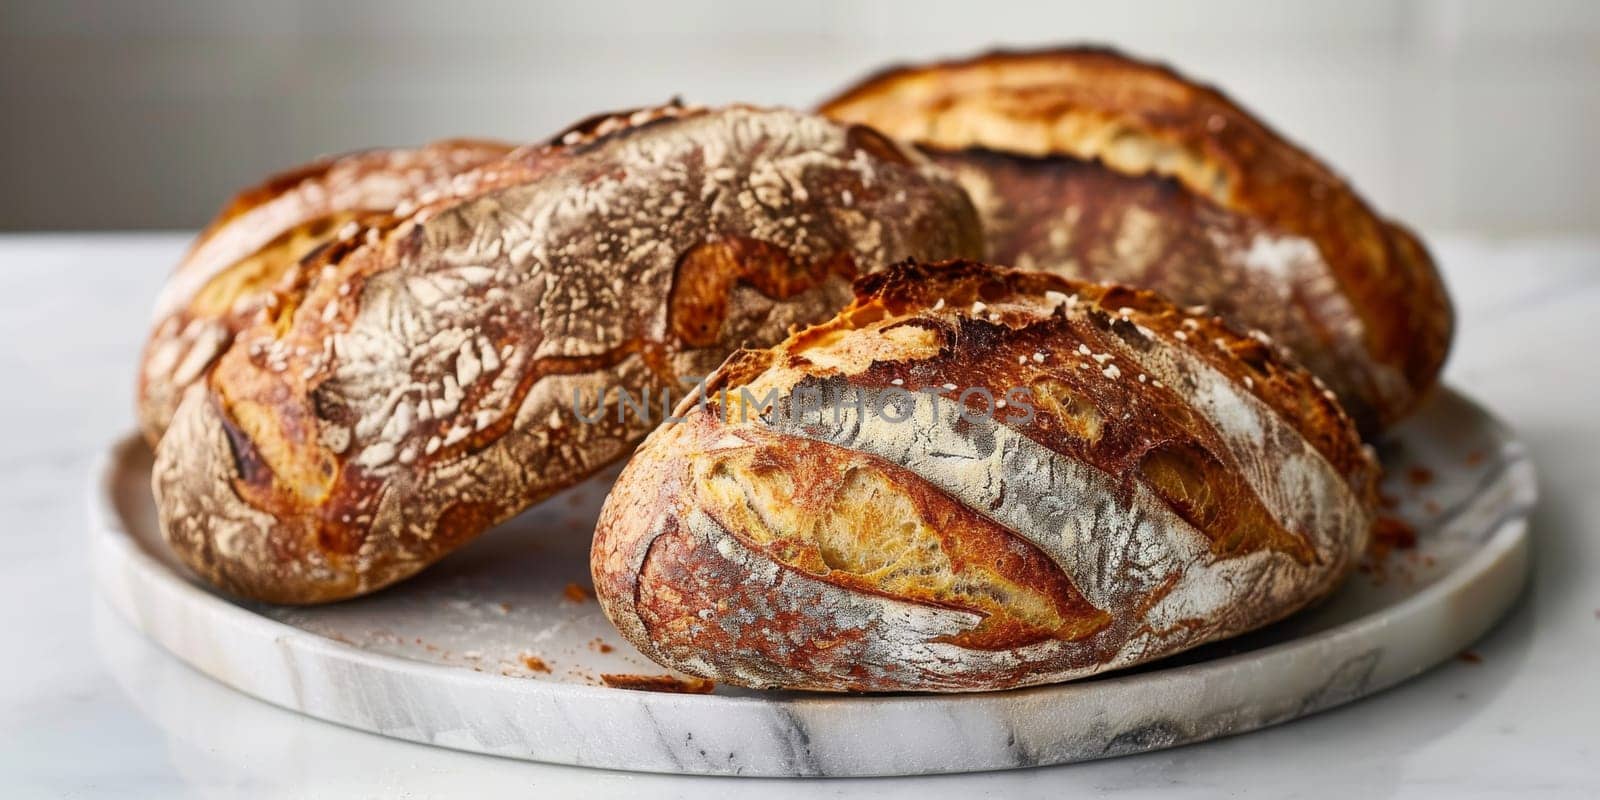 Handmade bread crusts, showcasing the craftsmanship and quality ingredients that distinguish an artisan bread